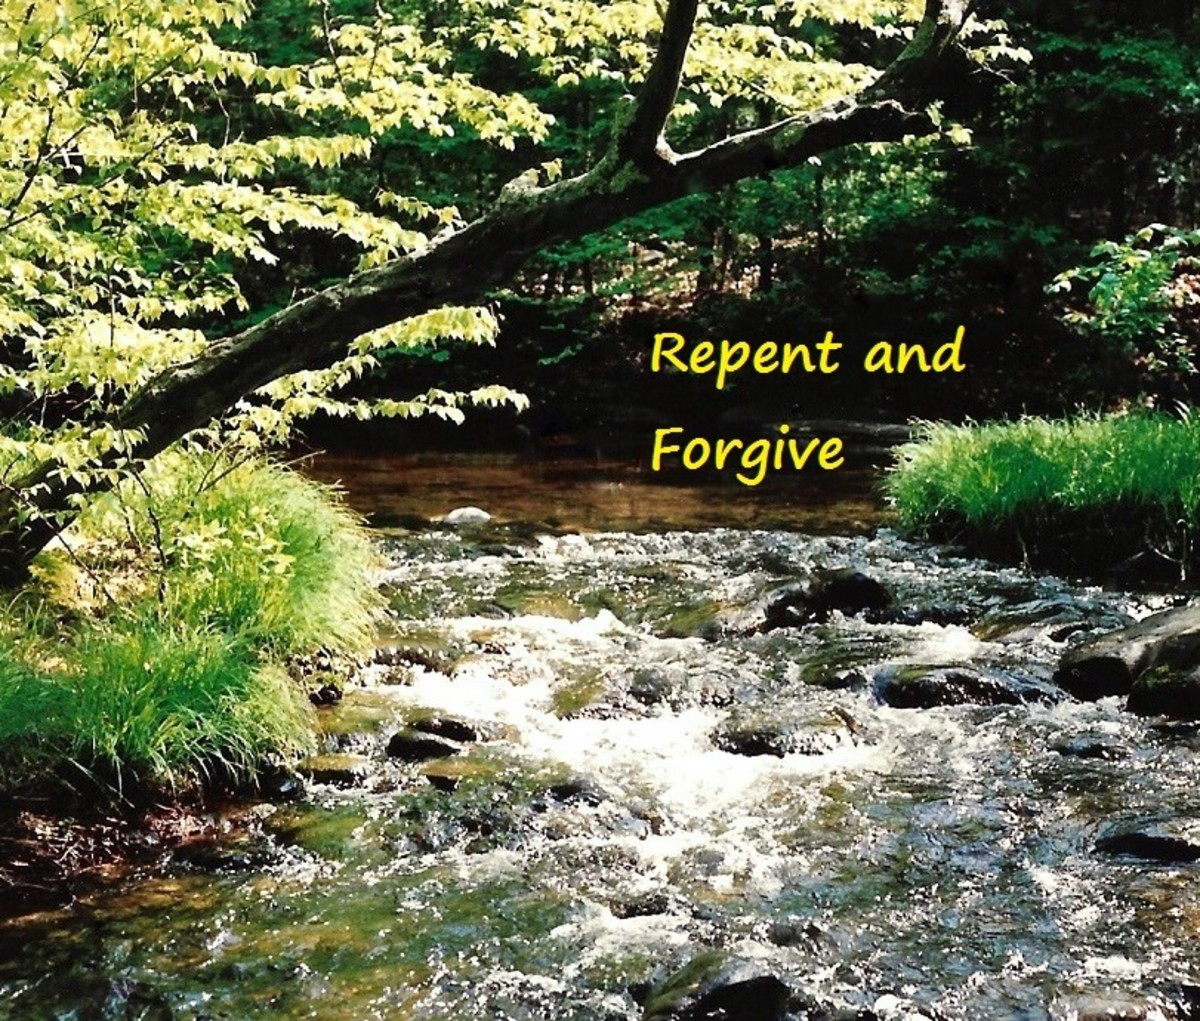 Repent and Forgive